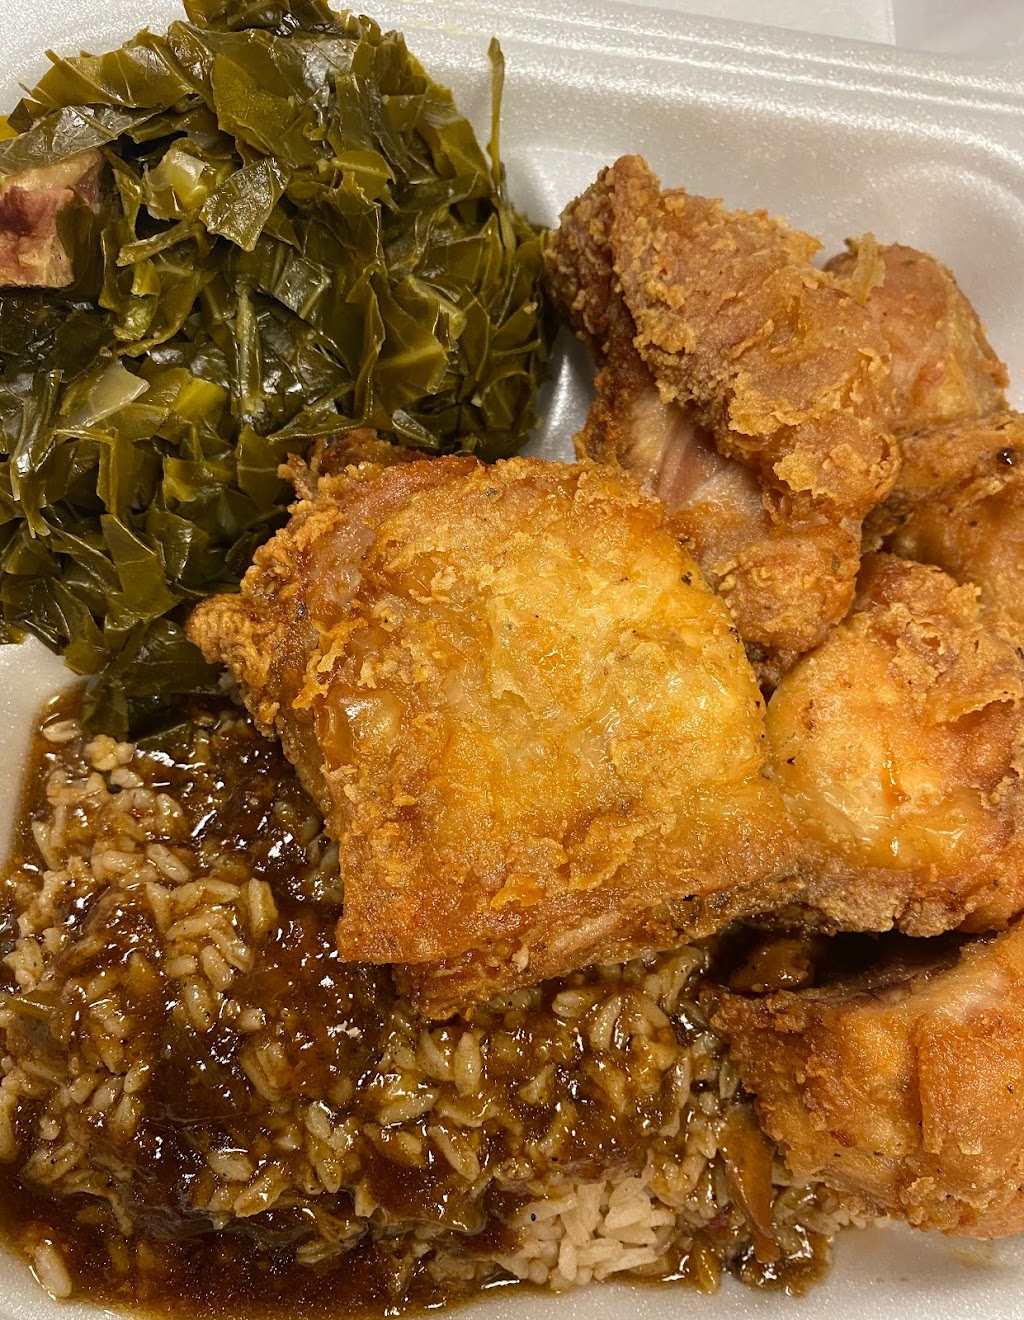 Island Spice Grill and Wings | 2755 Lee Rd, Douglasville, GA 30135 | Phone: (678) 505-8441